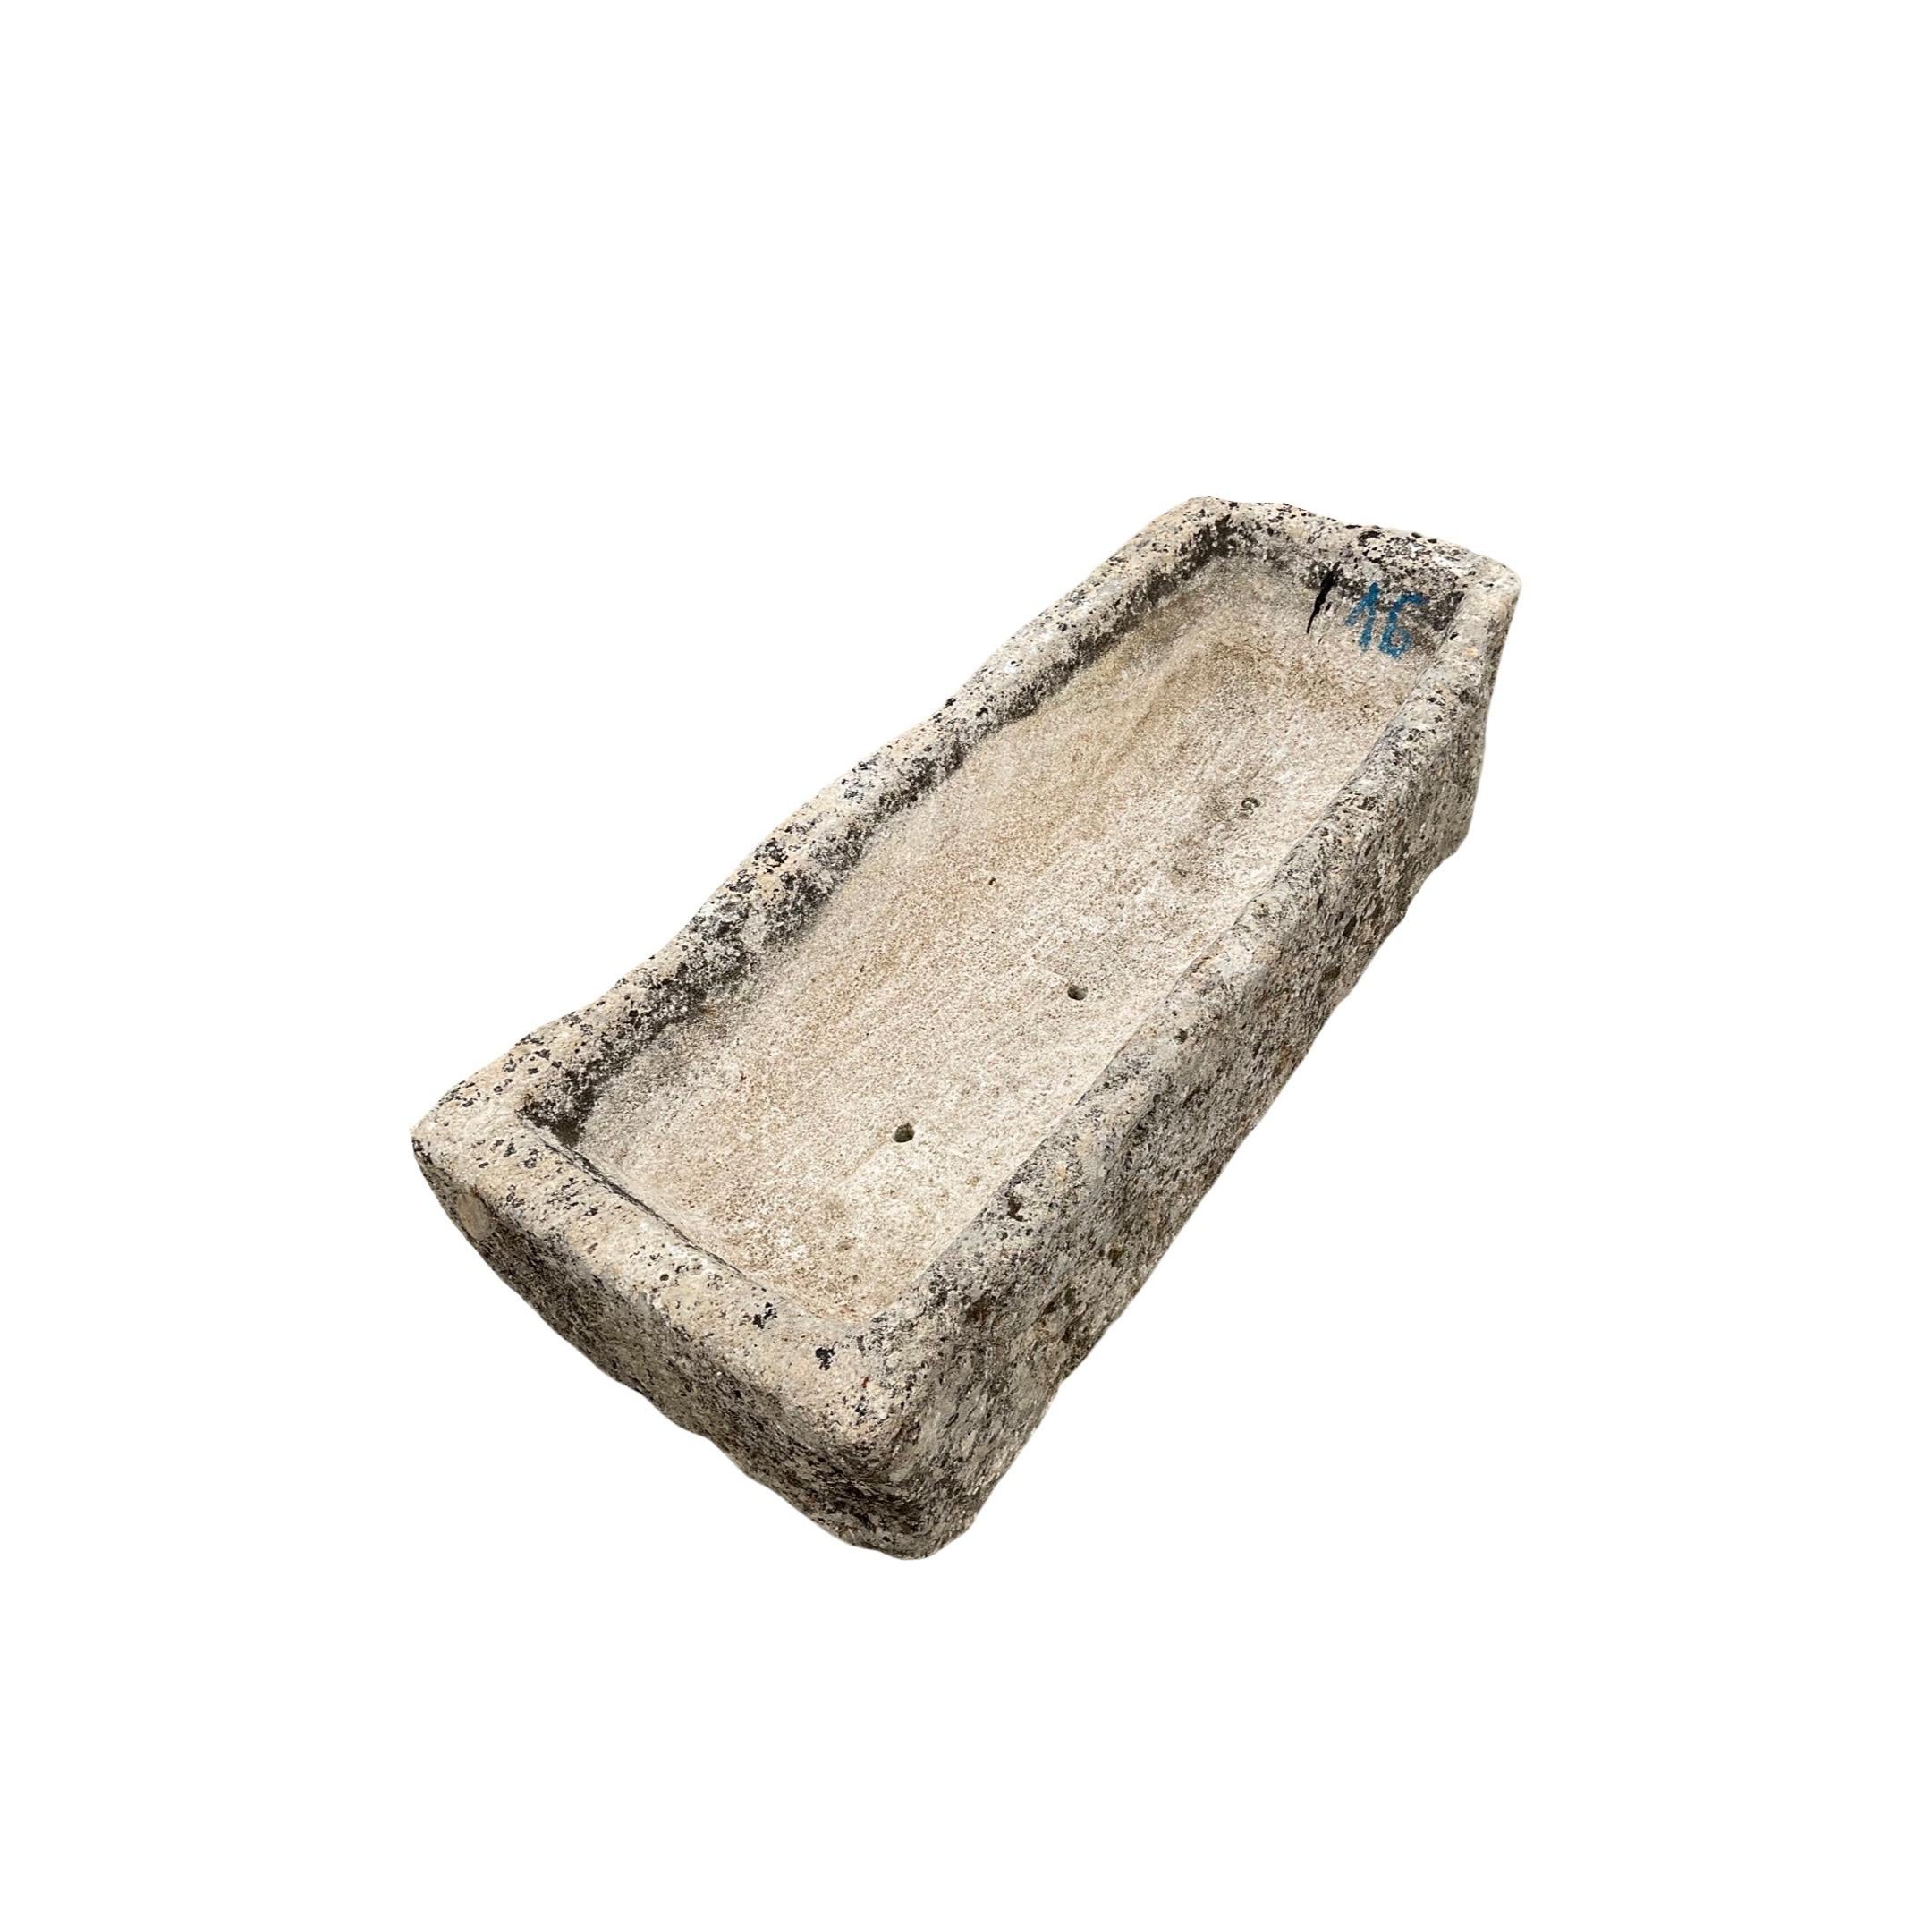 This authentic French Burgundy Trough, crafted during the 17th century, is constructed from high quality burgundy limestone and is the perfect addition to any architectural display. Expertly designed to last for decades, its classic and timeless